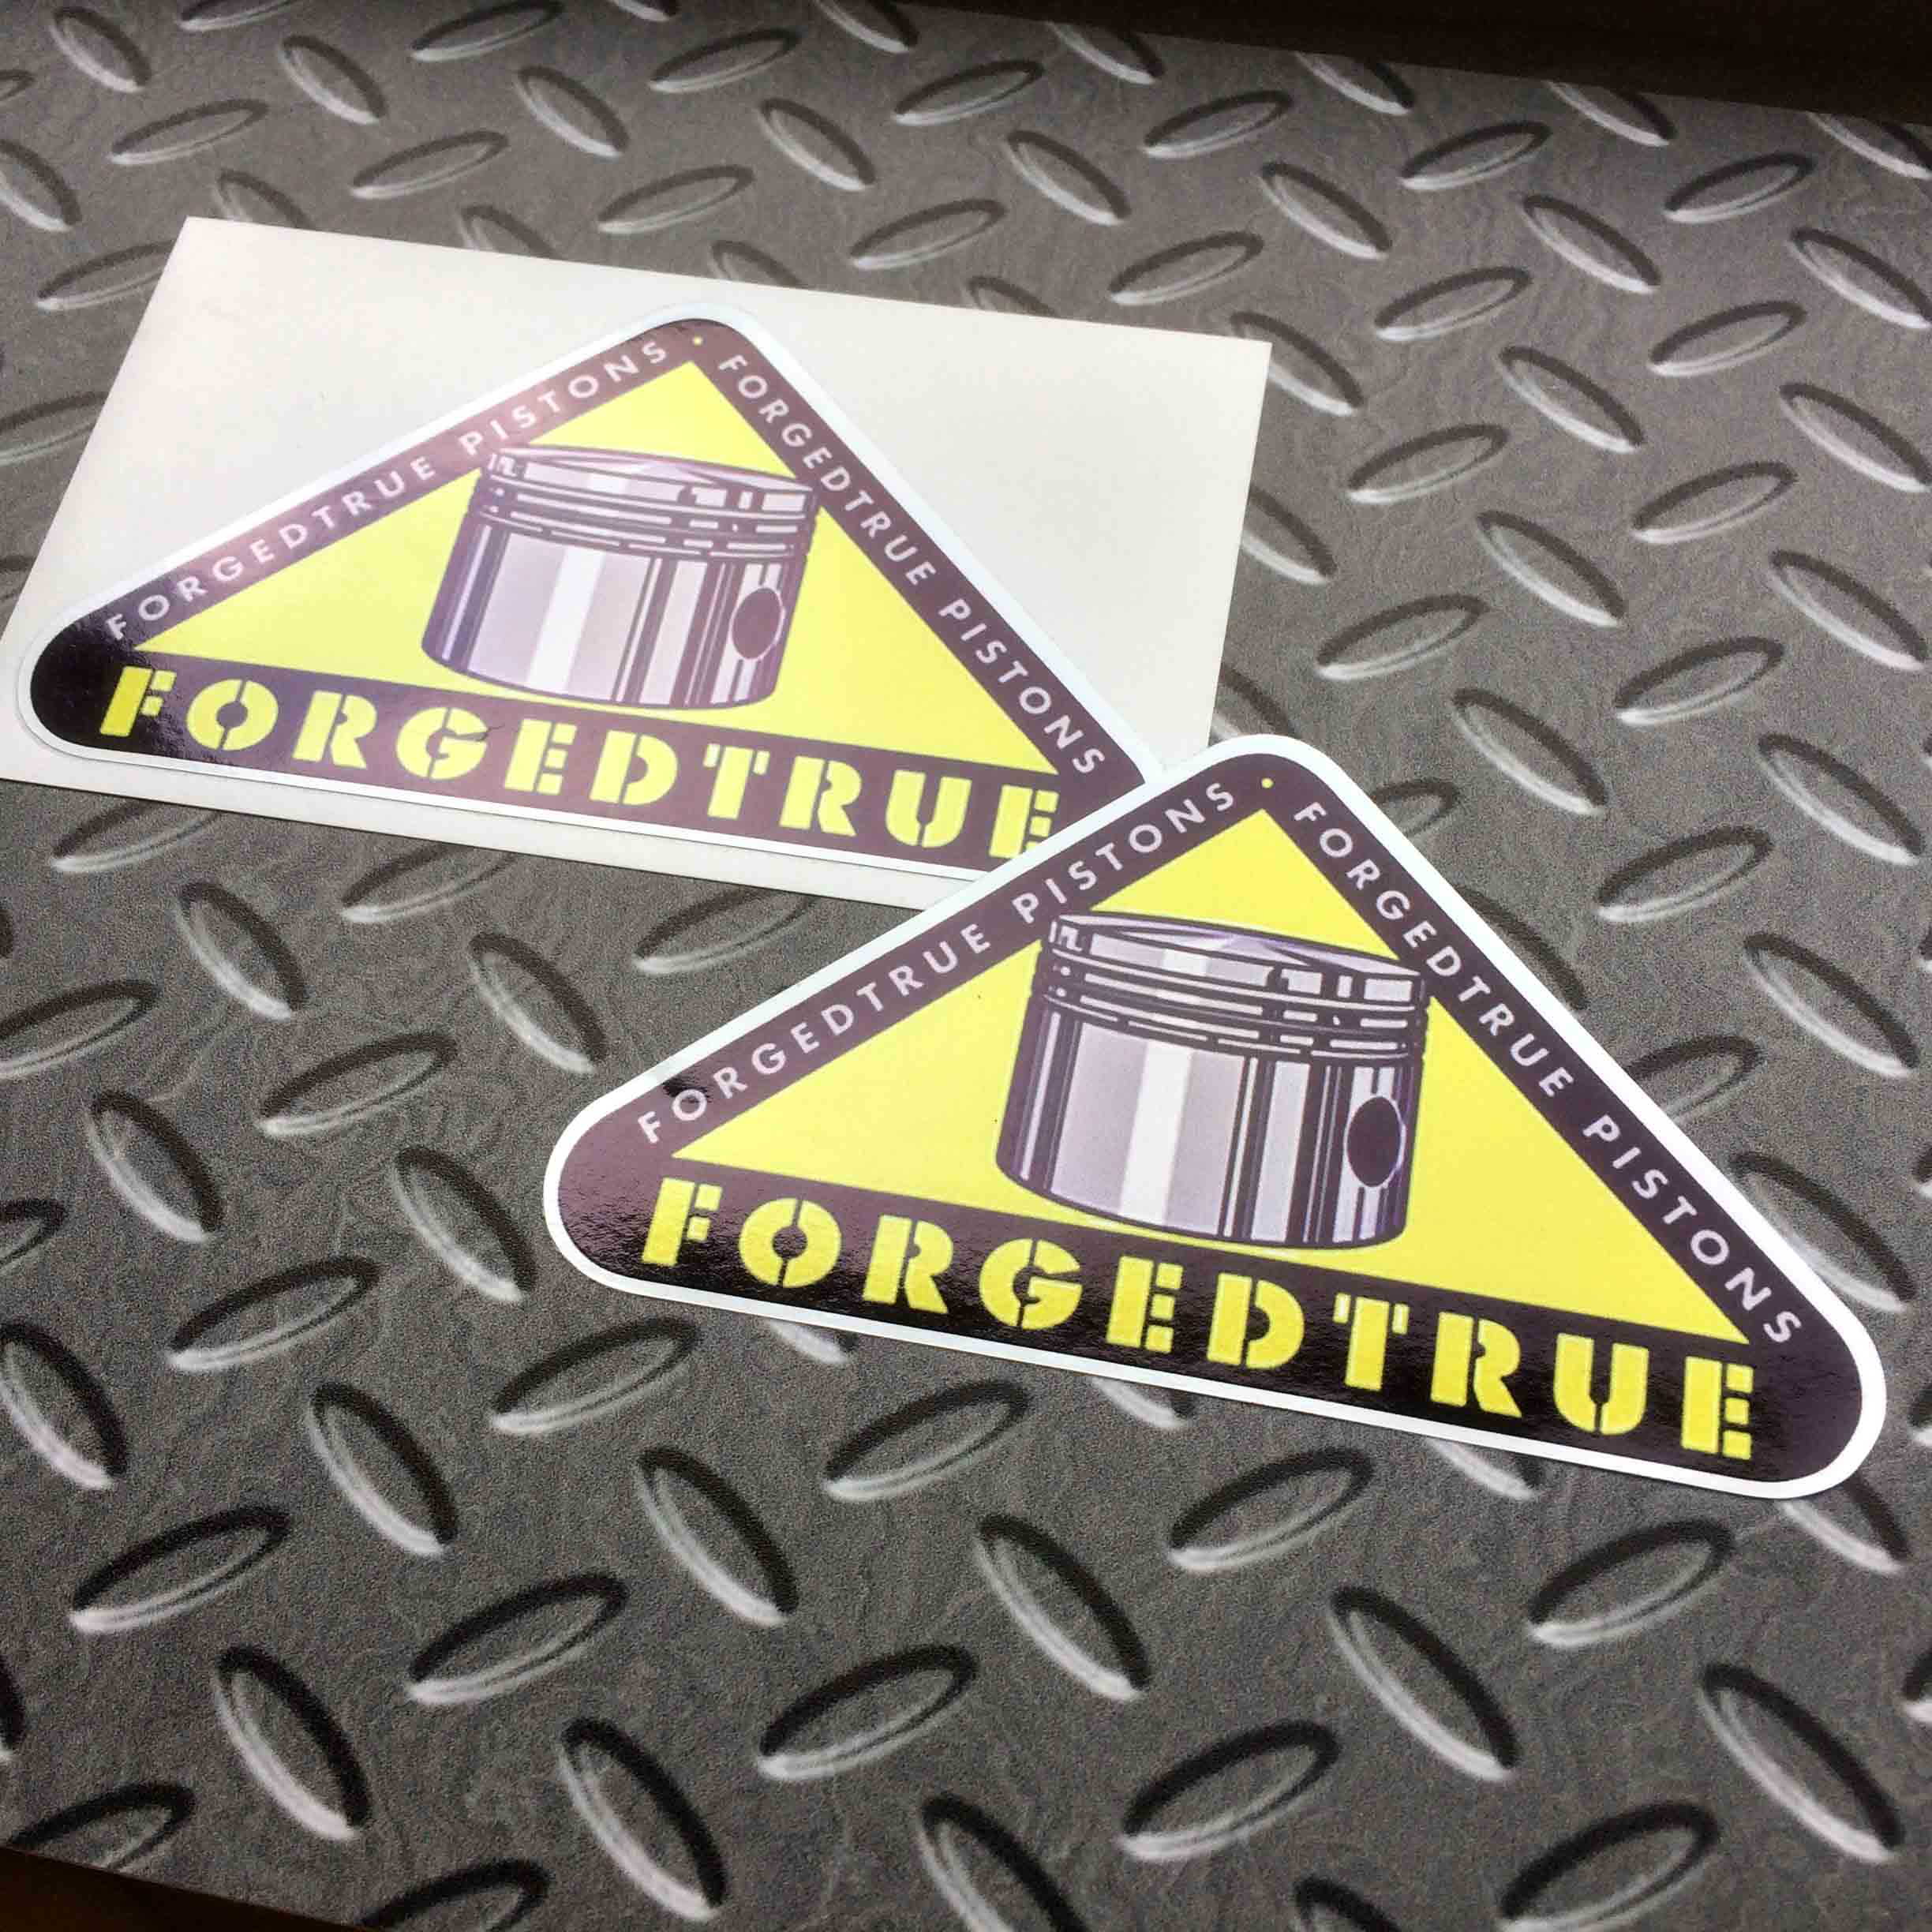 A piston on a yellow triangle bordered in black. Forgedtrue Pistons in grey lettering is along two sides. Forgedtrue in bold yellow lettering is across the base of the triangle.